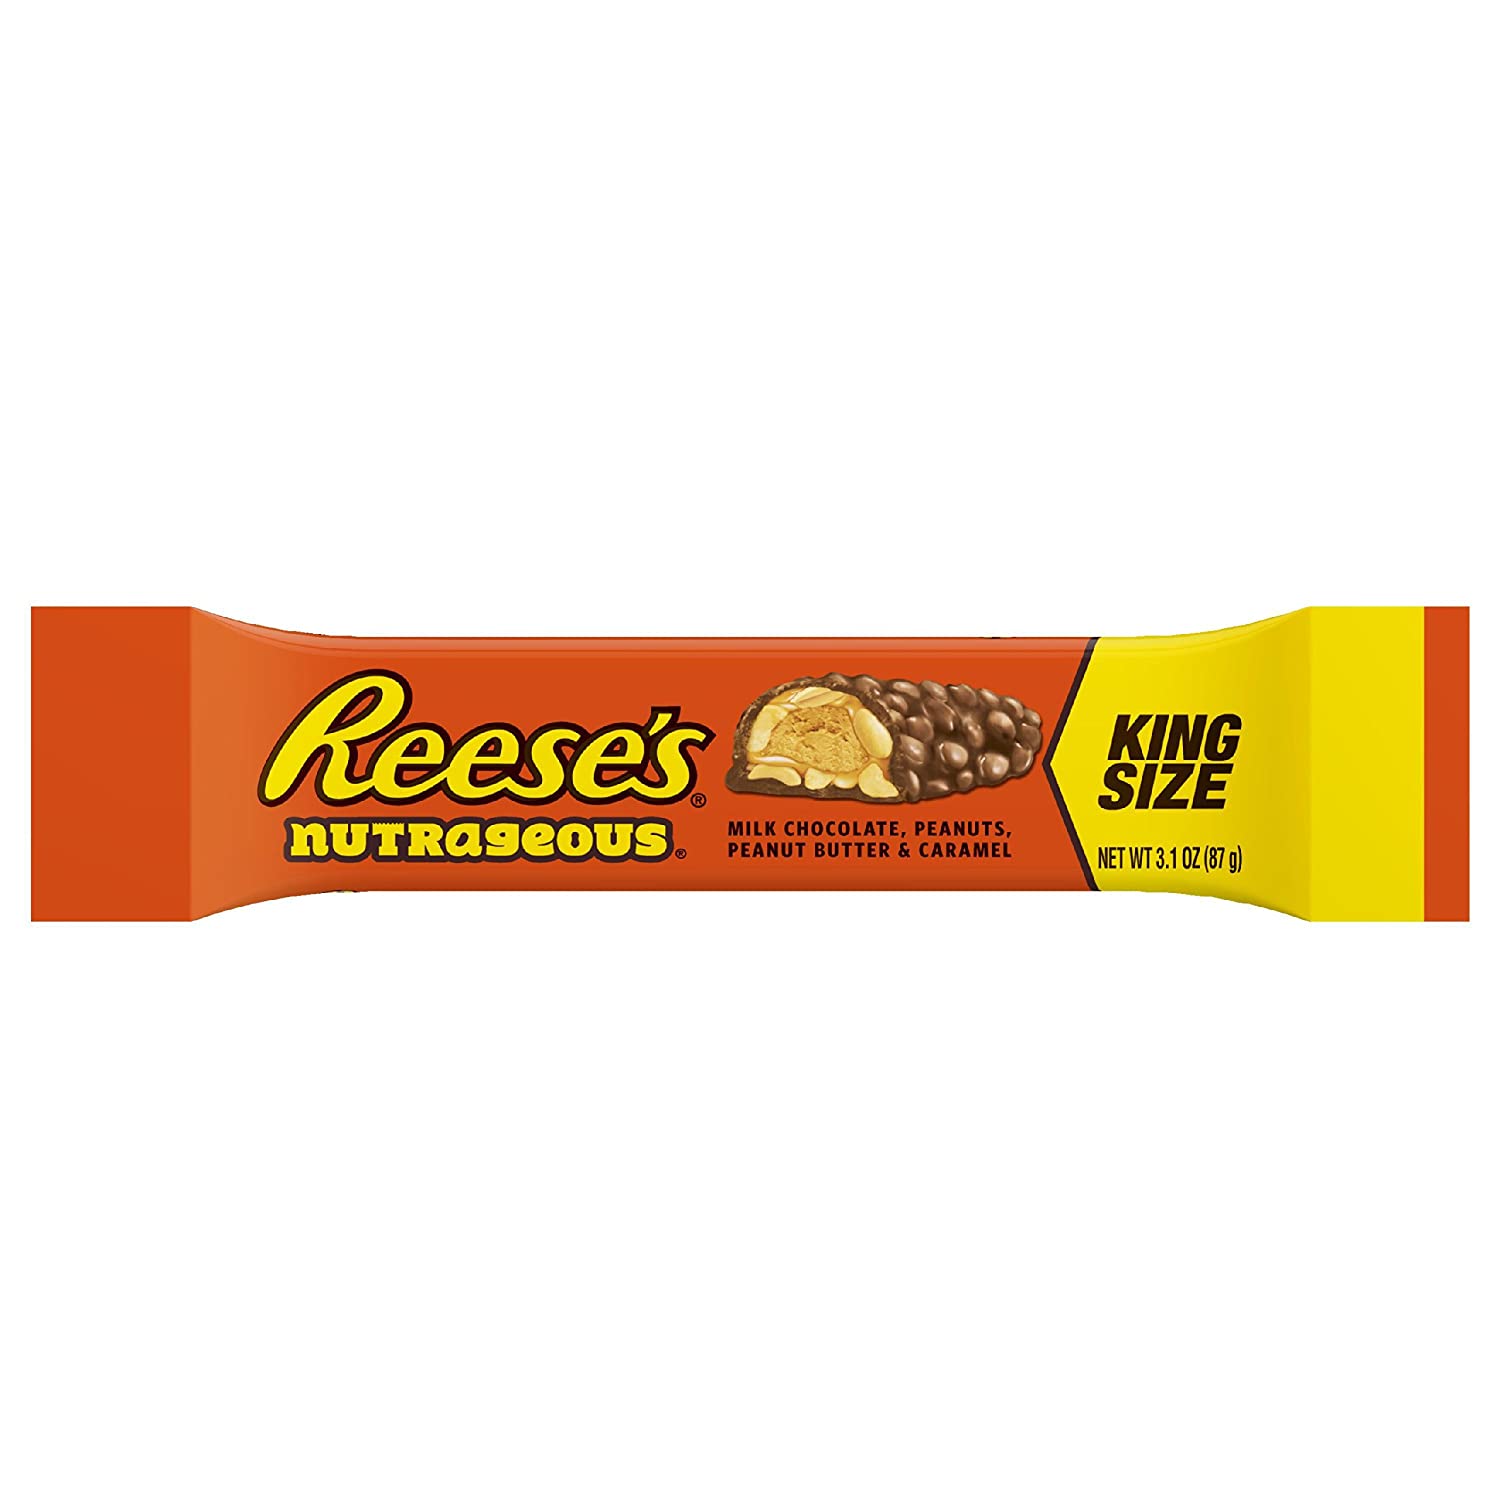 Reese's Nutrageous Peanut Butter Candy Bar, King Size, 3.1oz